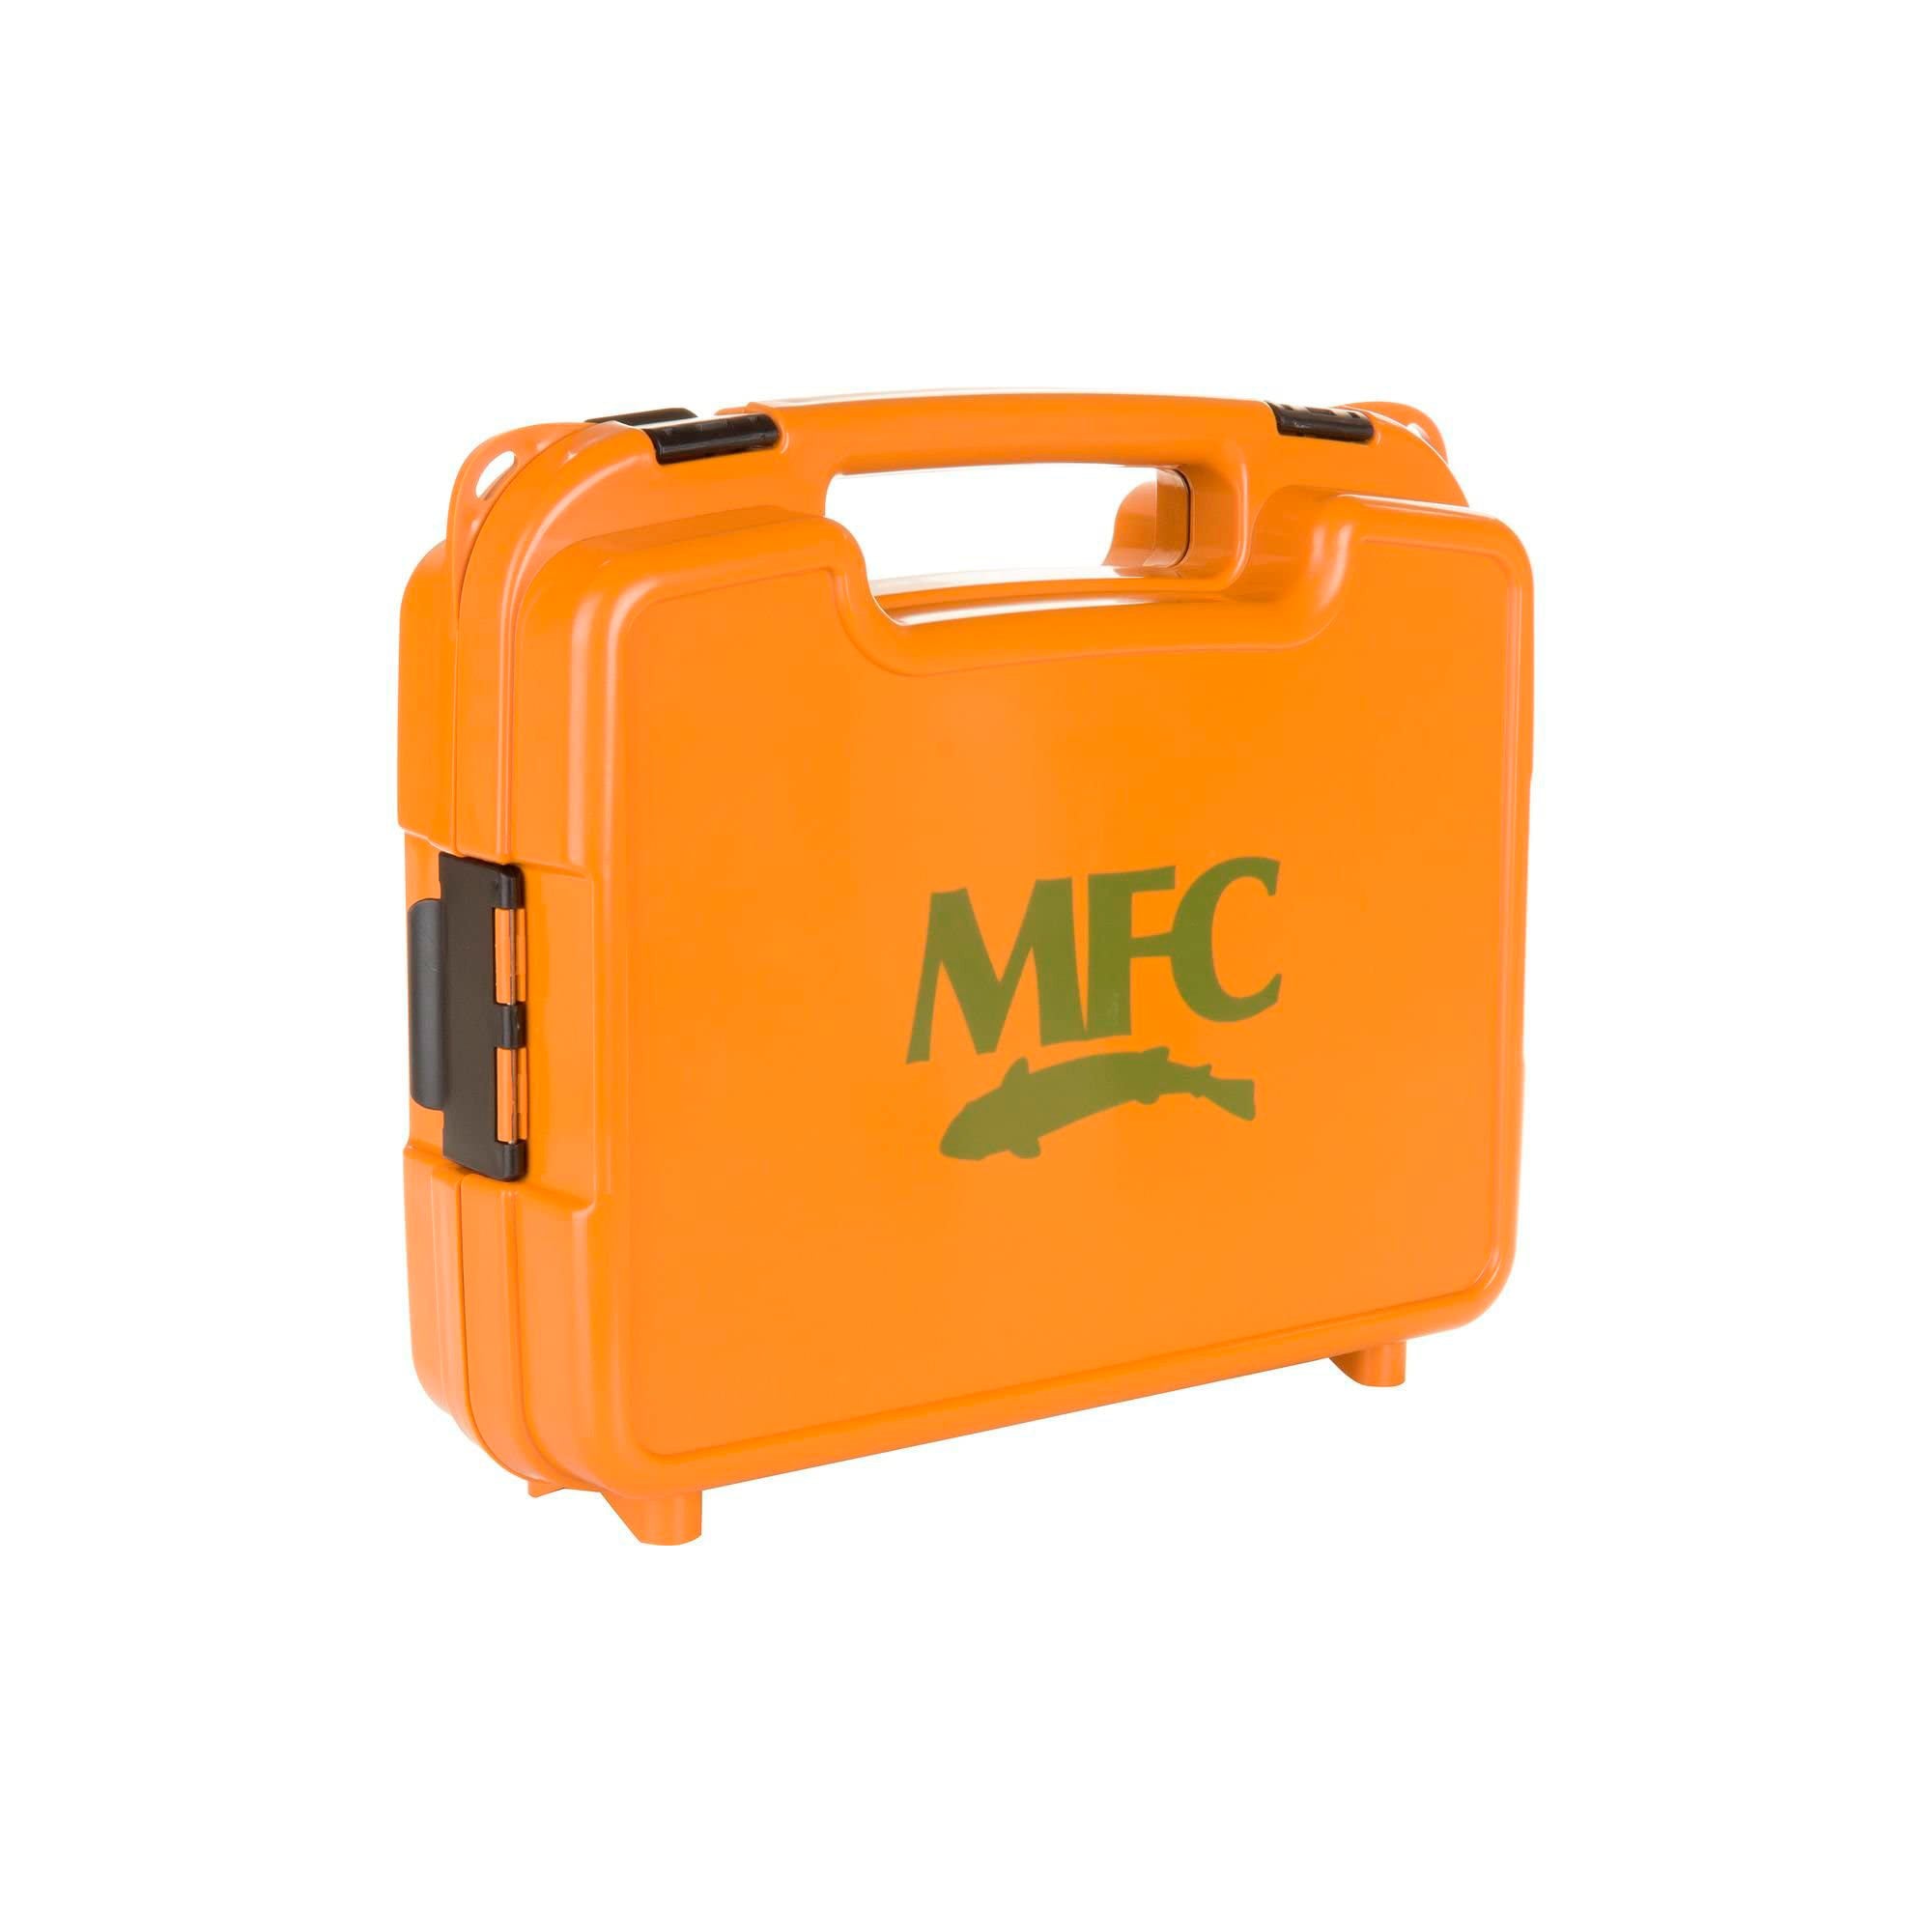 MFC Boat Box, Olive, Large Fly Foam